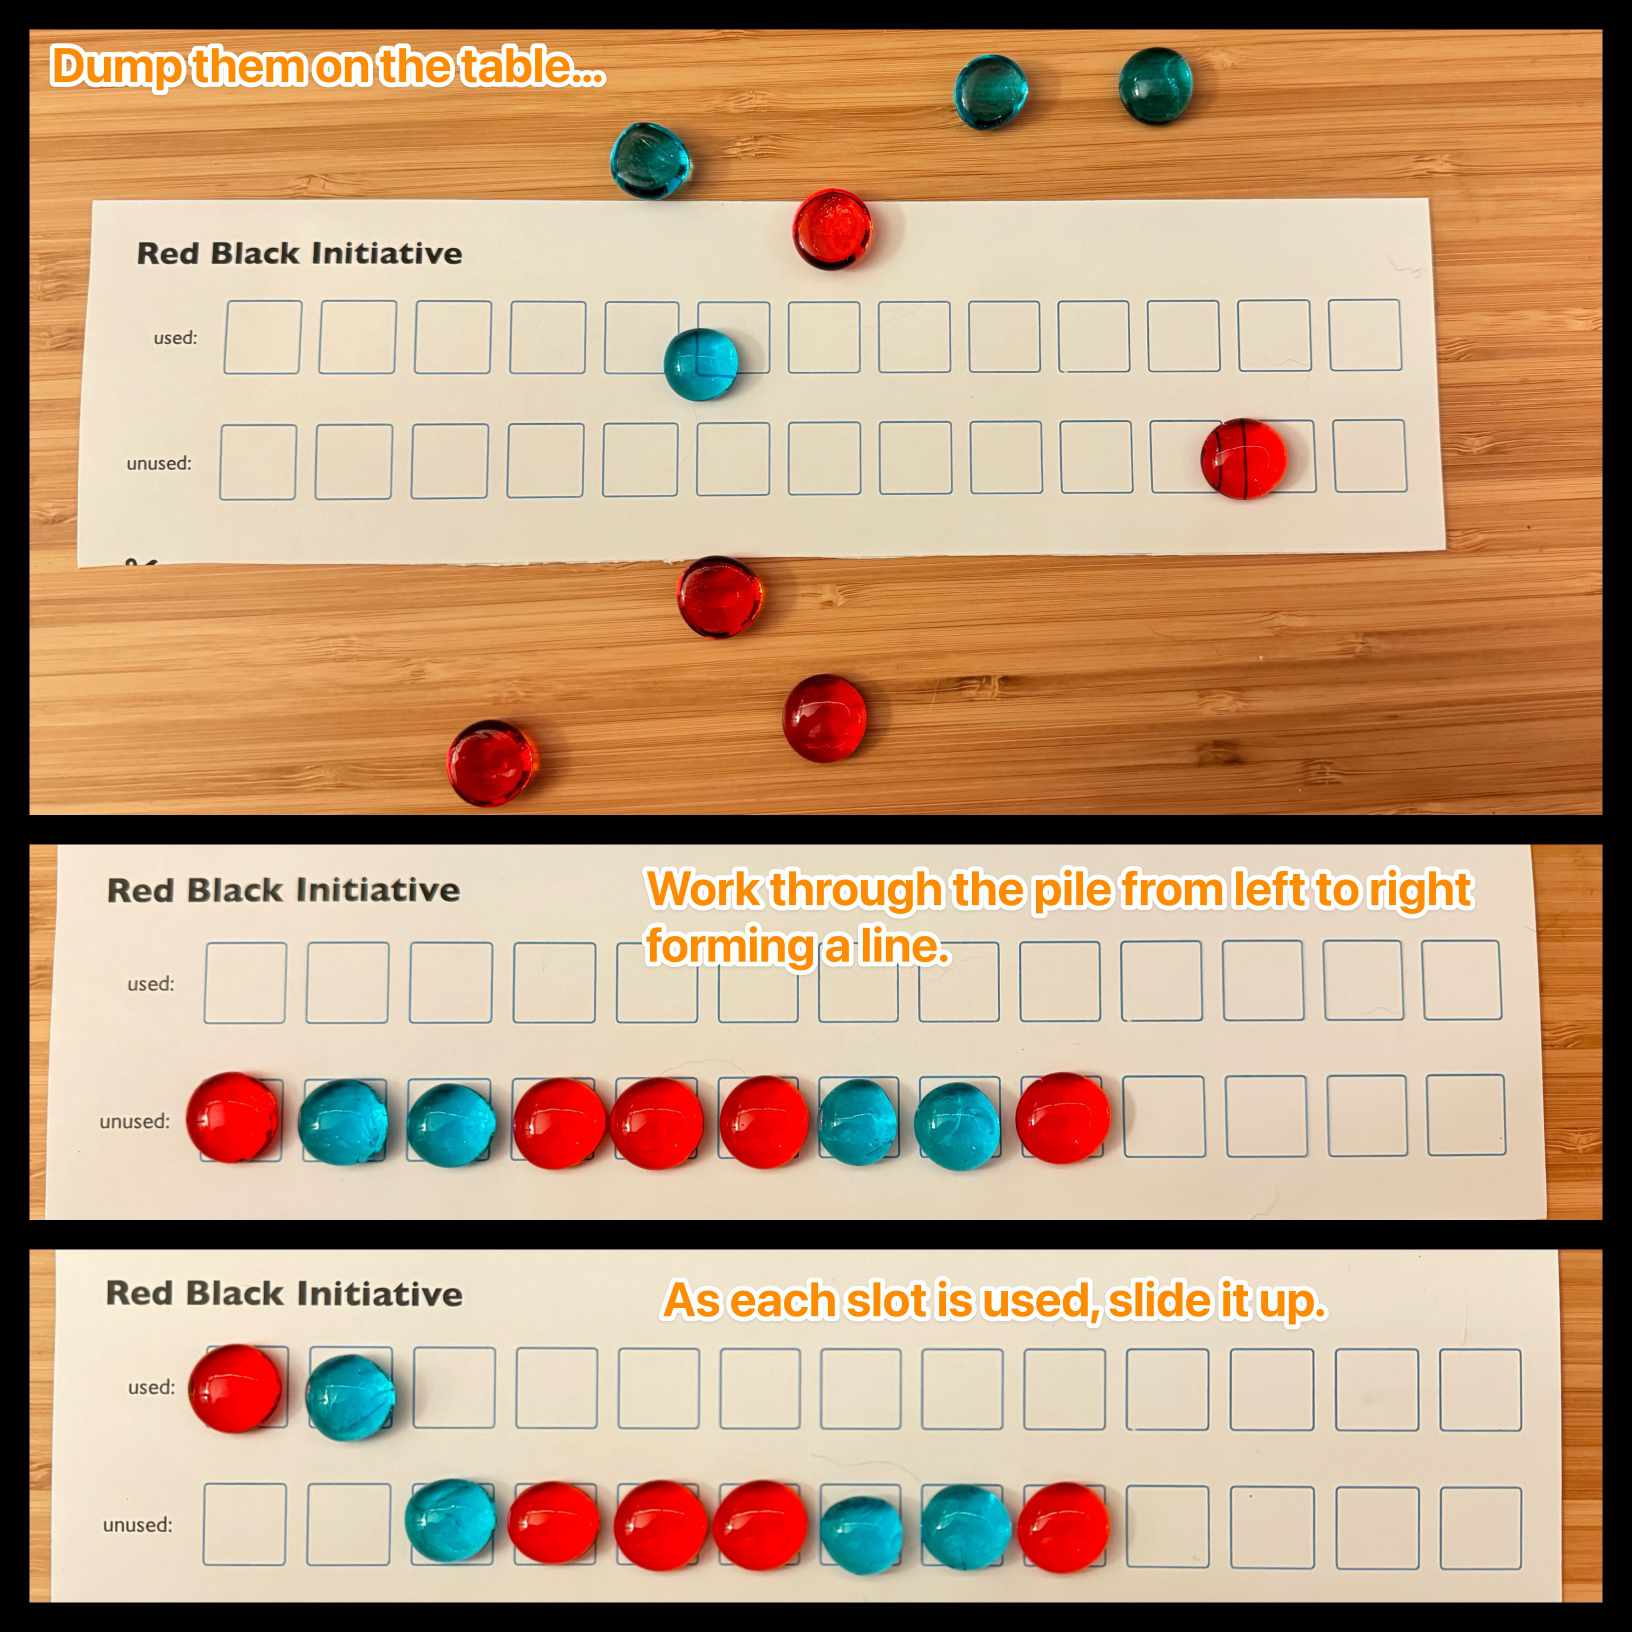 an annotated triptic showing two colors of glass beads spread across the worksheet, the beads ordered into a line, and then the first two beads having been slid up into a different row than the original line of beads.